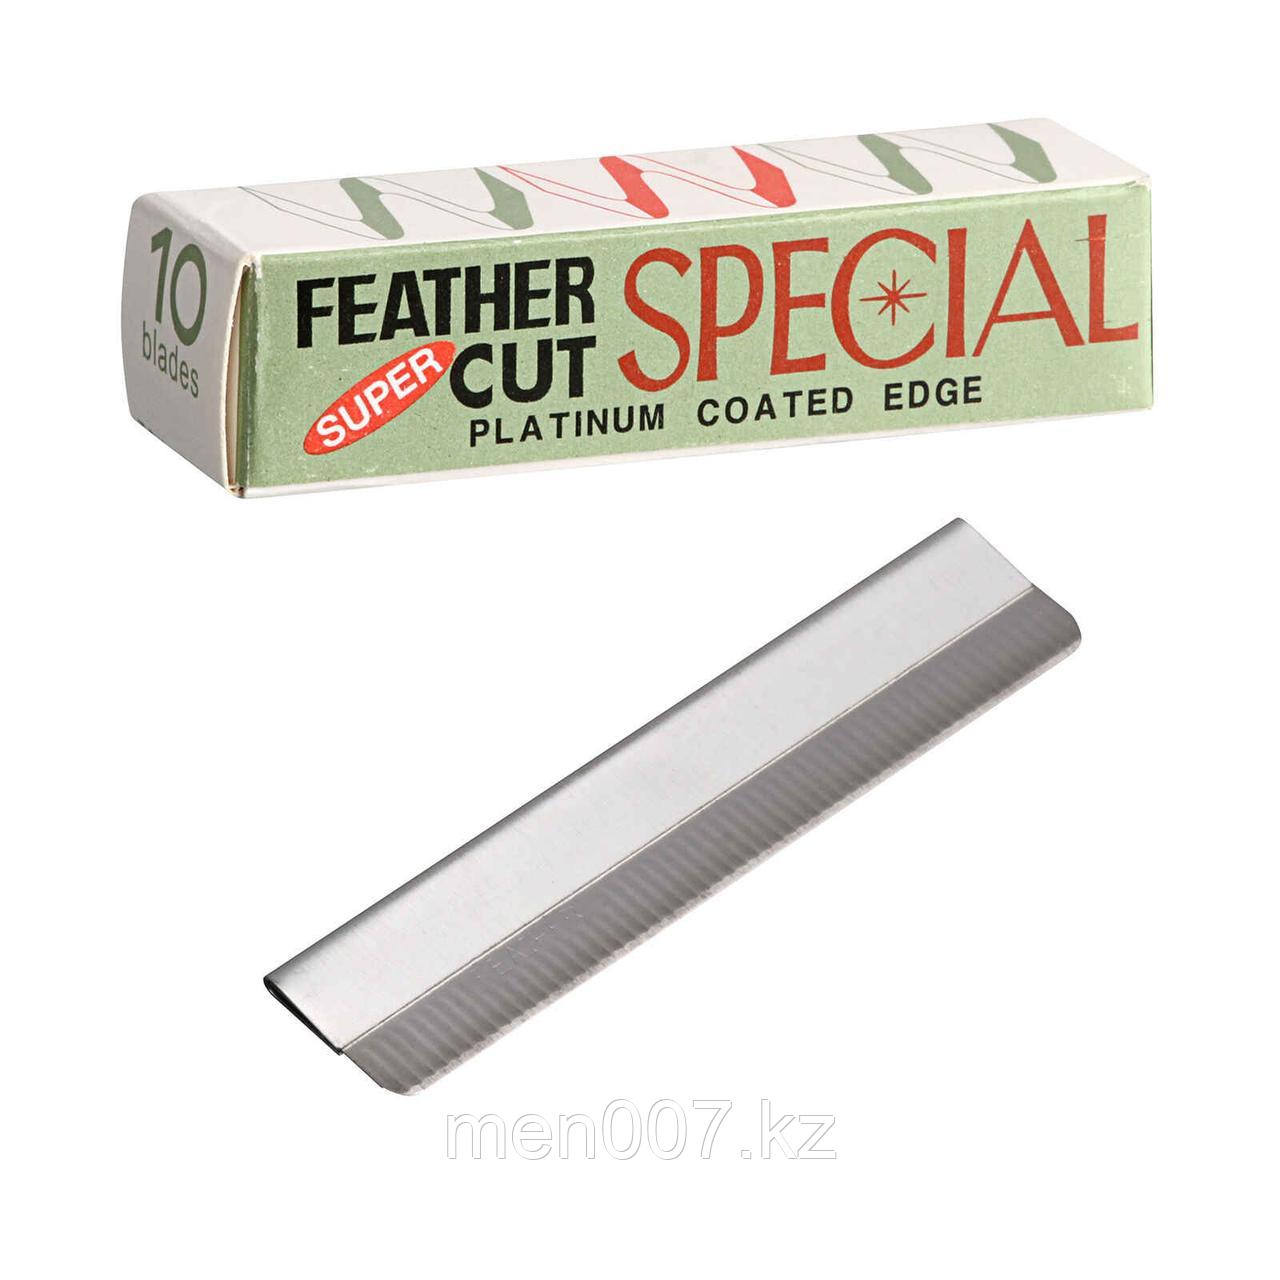 Feather Cut SPECIAL (Platinum Coated Edge) (лезвия 10 штук) - Копия